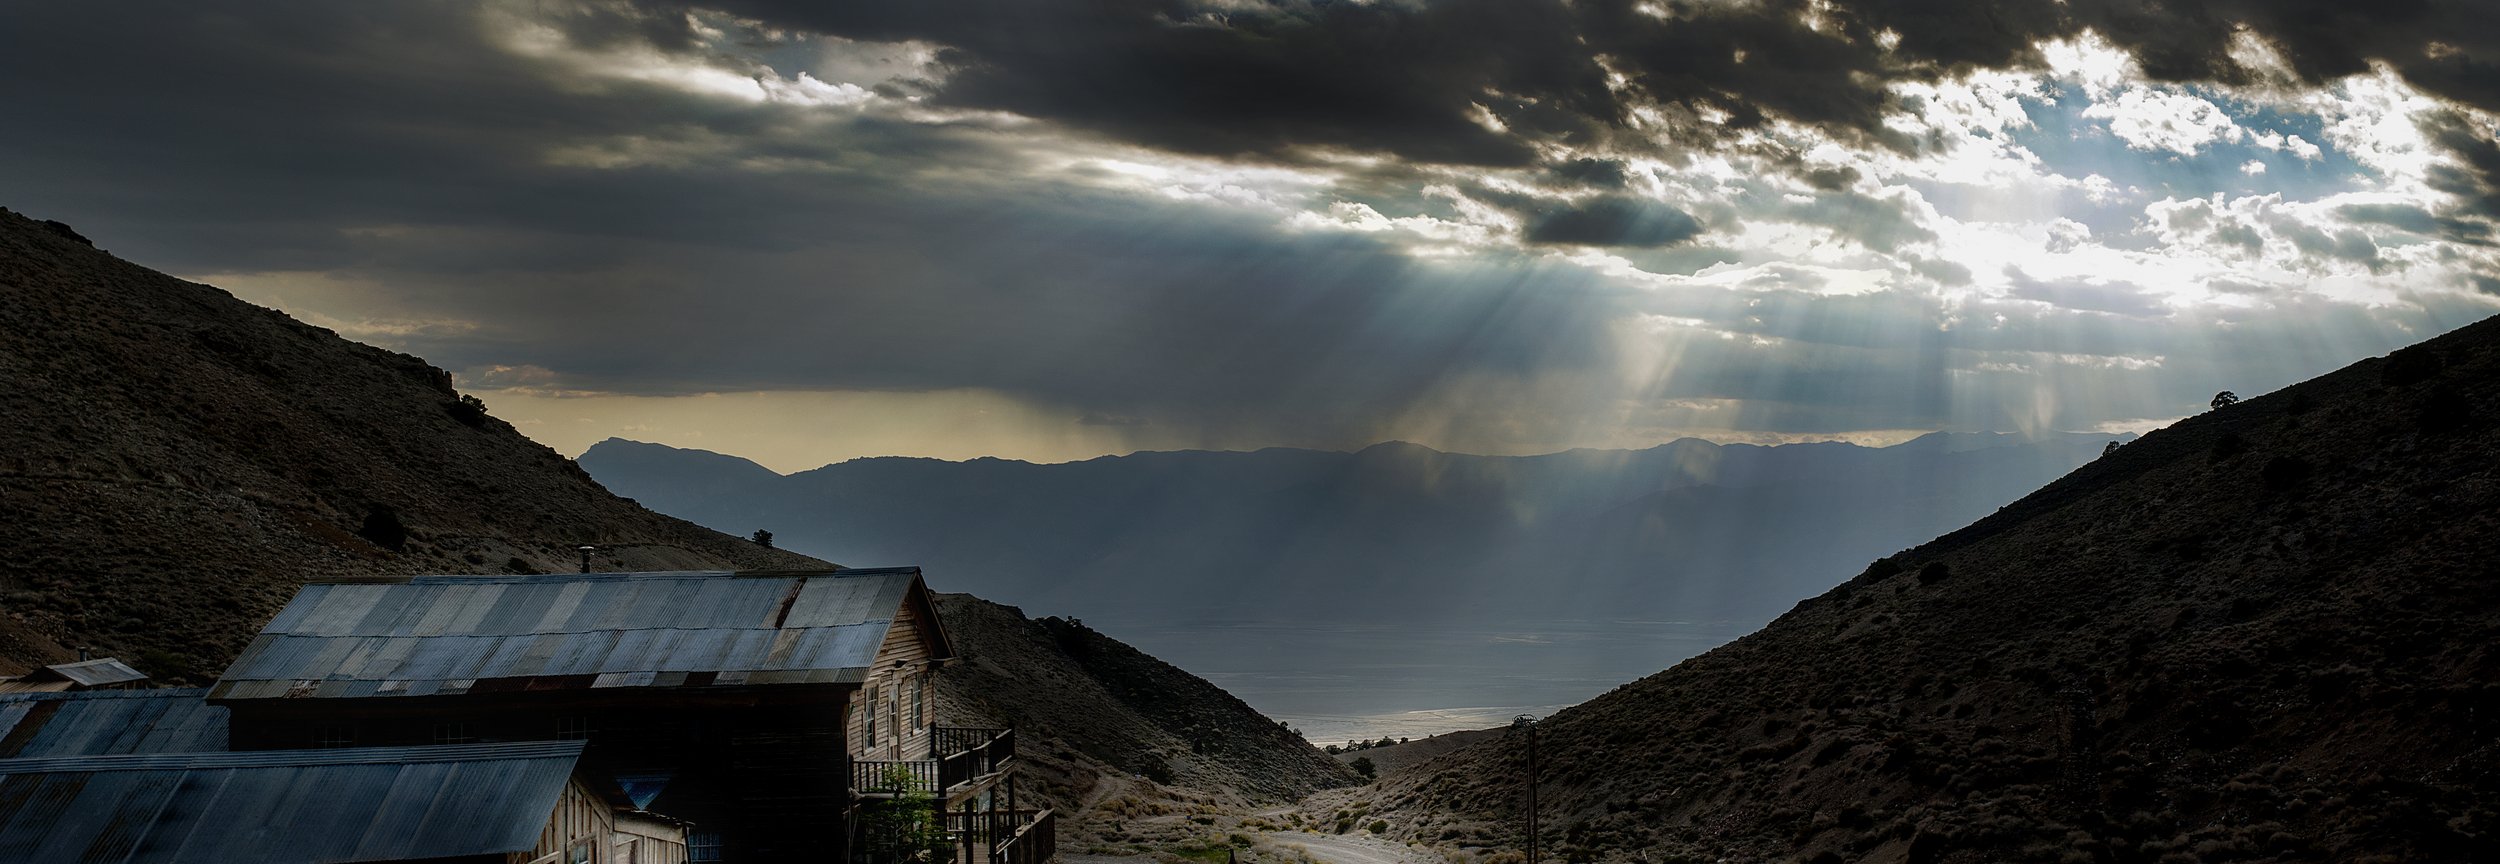  Panoramic view from Cerro Gordo ghost town, looking west over Owens Lake and the Sierra Nevada Mountains. Owens Valley, CA. 